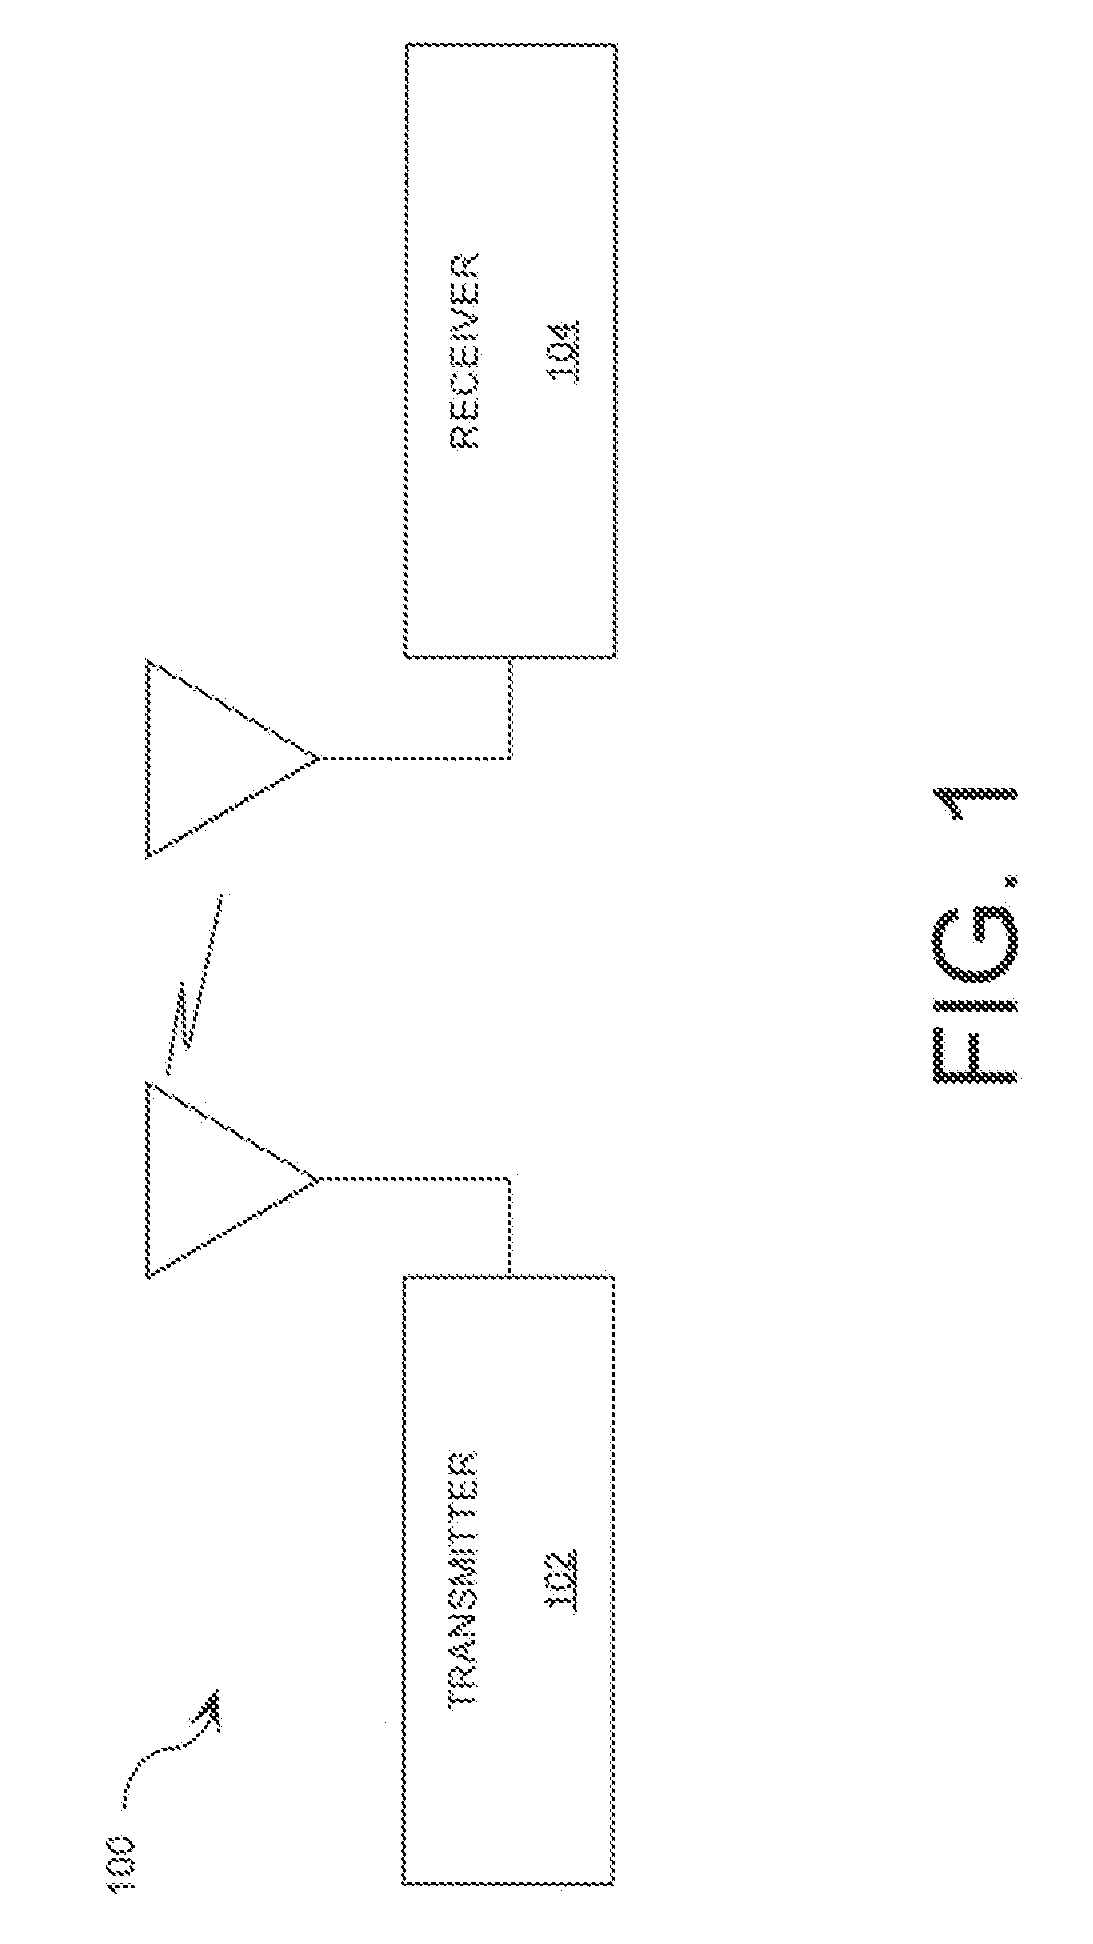 Spread Spectrum Communications System and Method Utilizing Chaotic Sequence